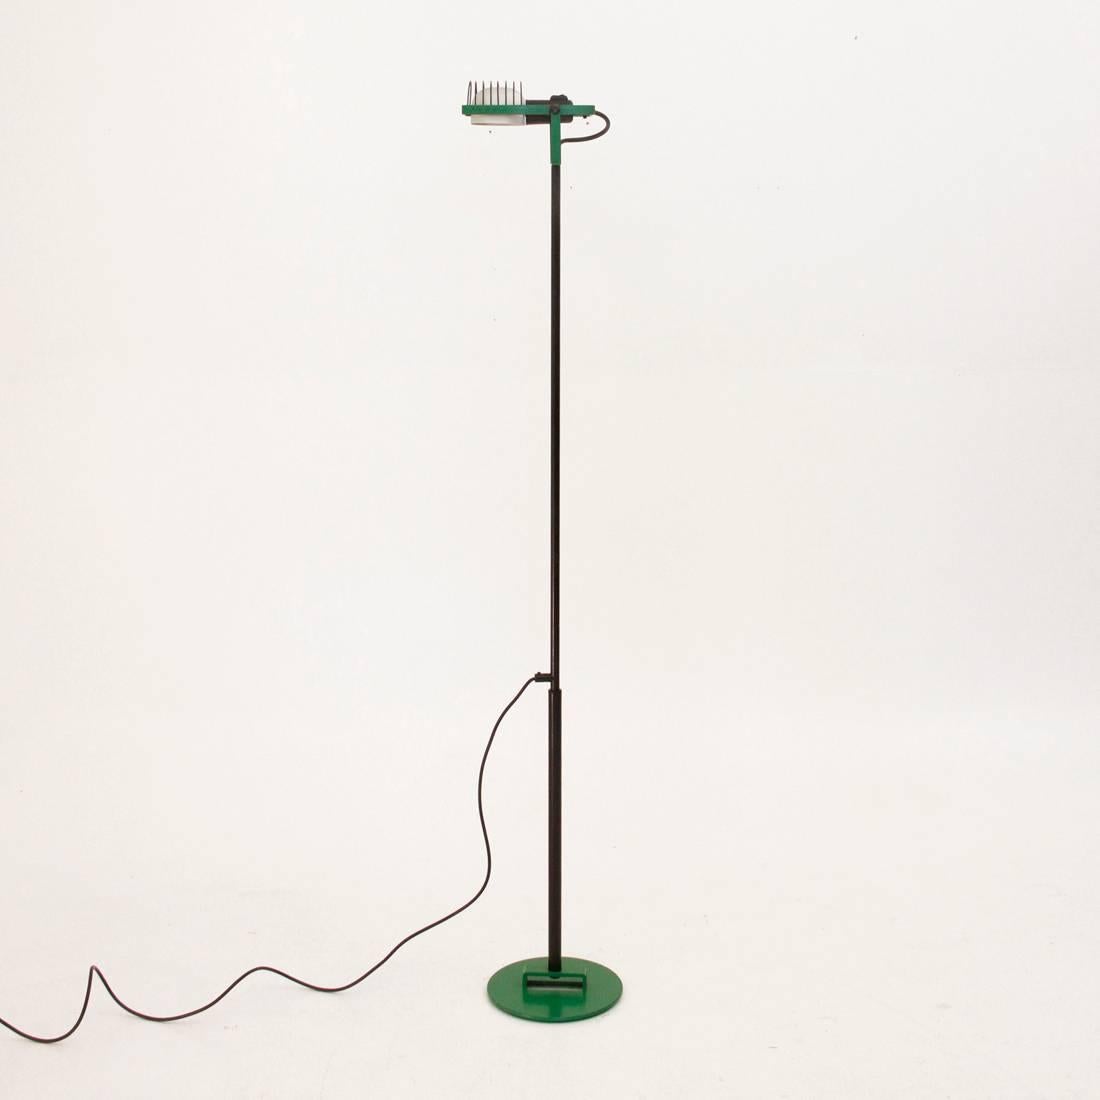 Floor lamp Produced by Artemide, designed by Ernesto Gismondi in 1975.
Structure in green and black painted metal, aluminum diffuser.
Good general condition, some signs of the time, is missing a cover bolt. The switch, sometimes, does not do well